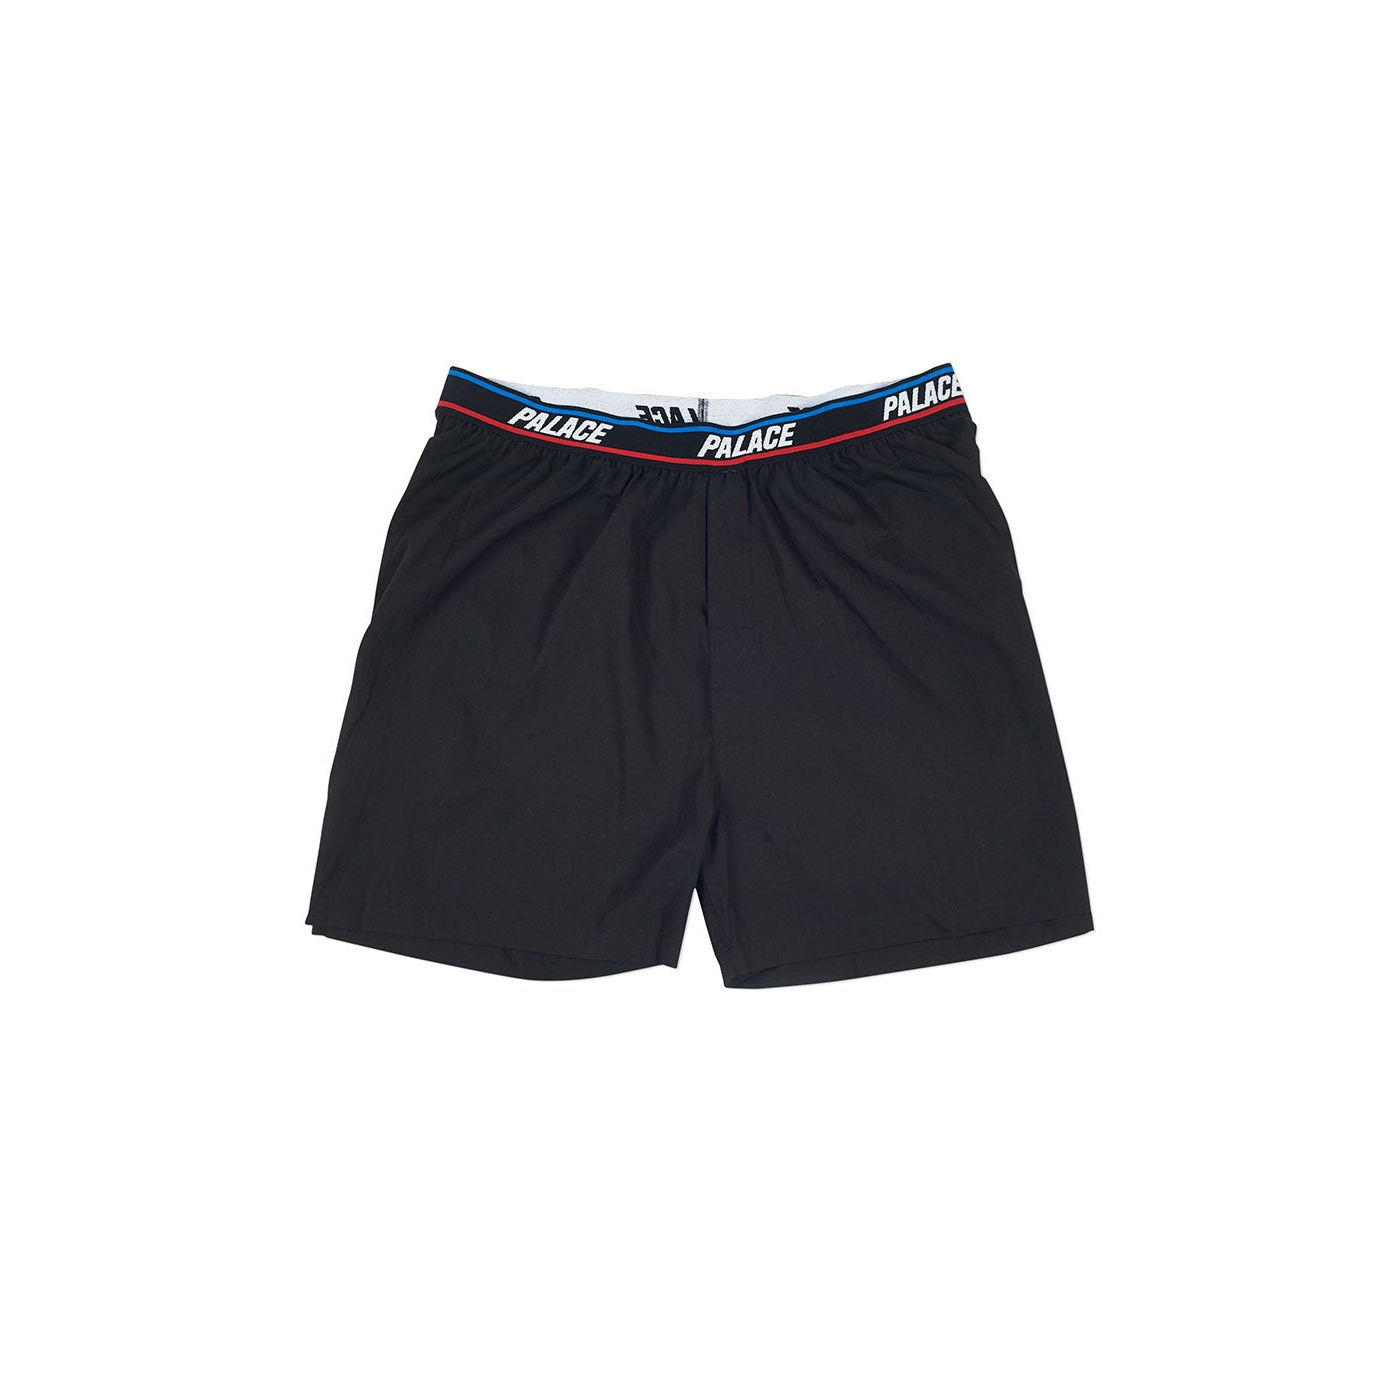 Thumbnail BASICALLY A PACK OF BOXERS BLACK / NAVY / WHITE one color